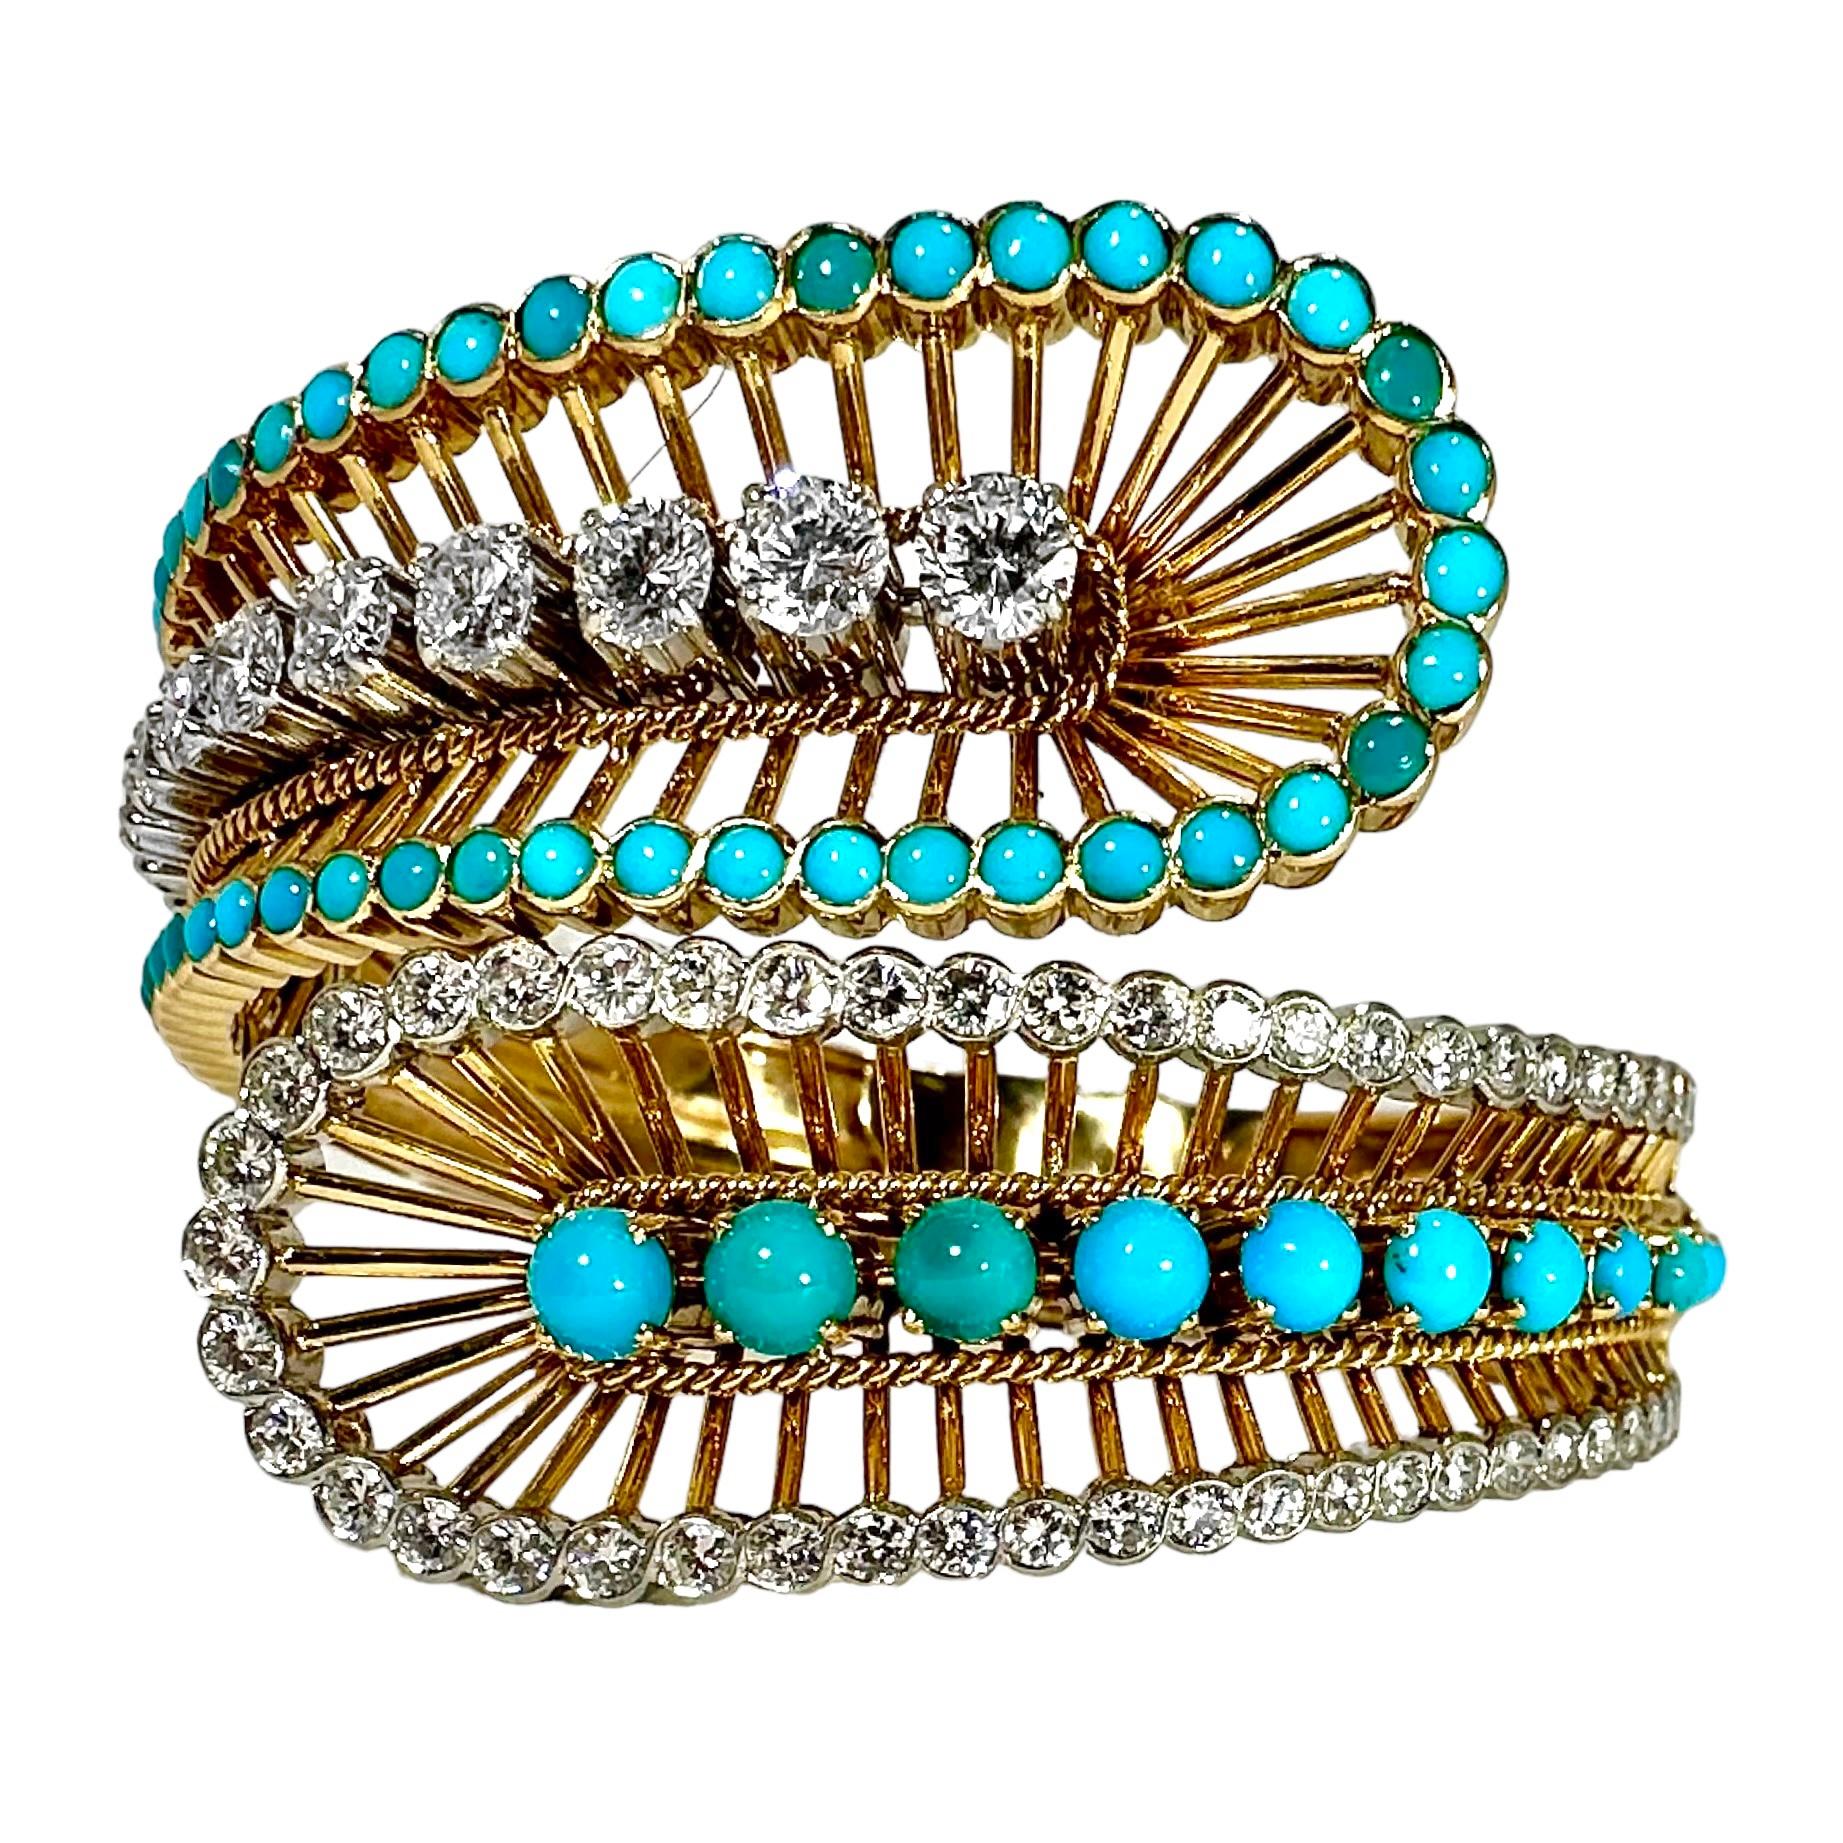 Elegant Wide Bypass Cuff in Gold, Turquoise & Diamonds by Greek Maker VOURAKIS  2